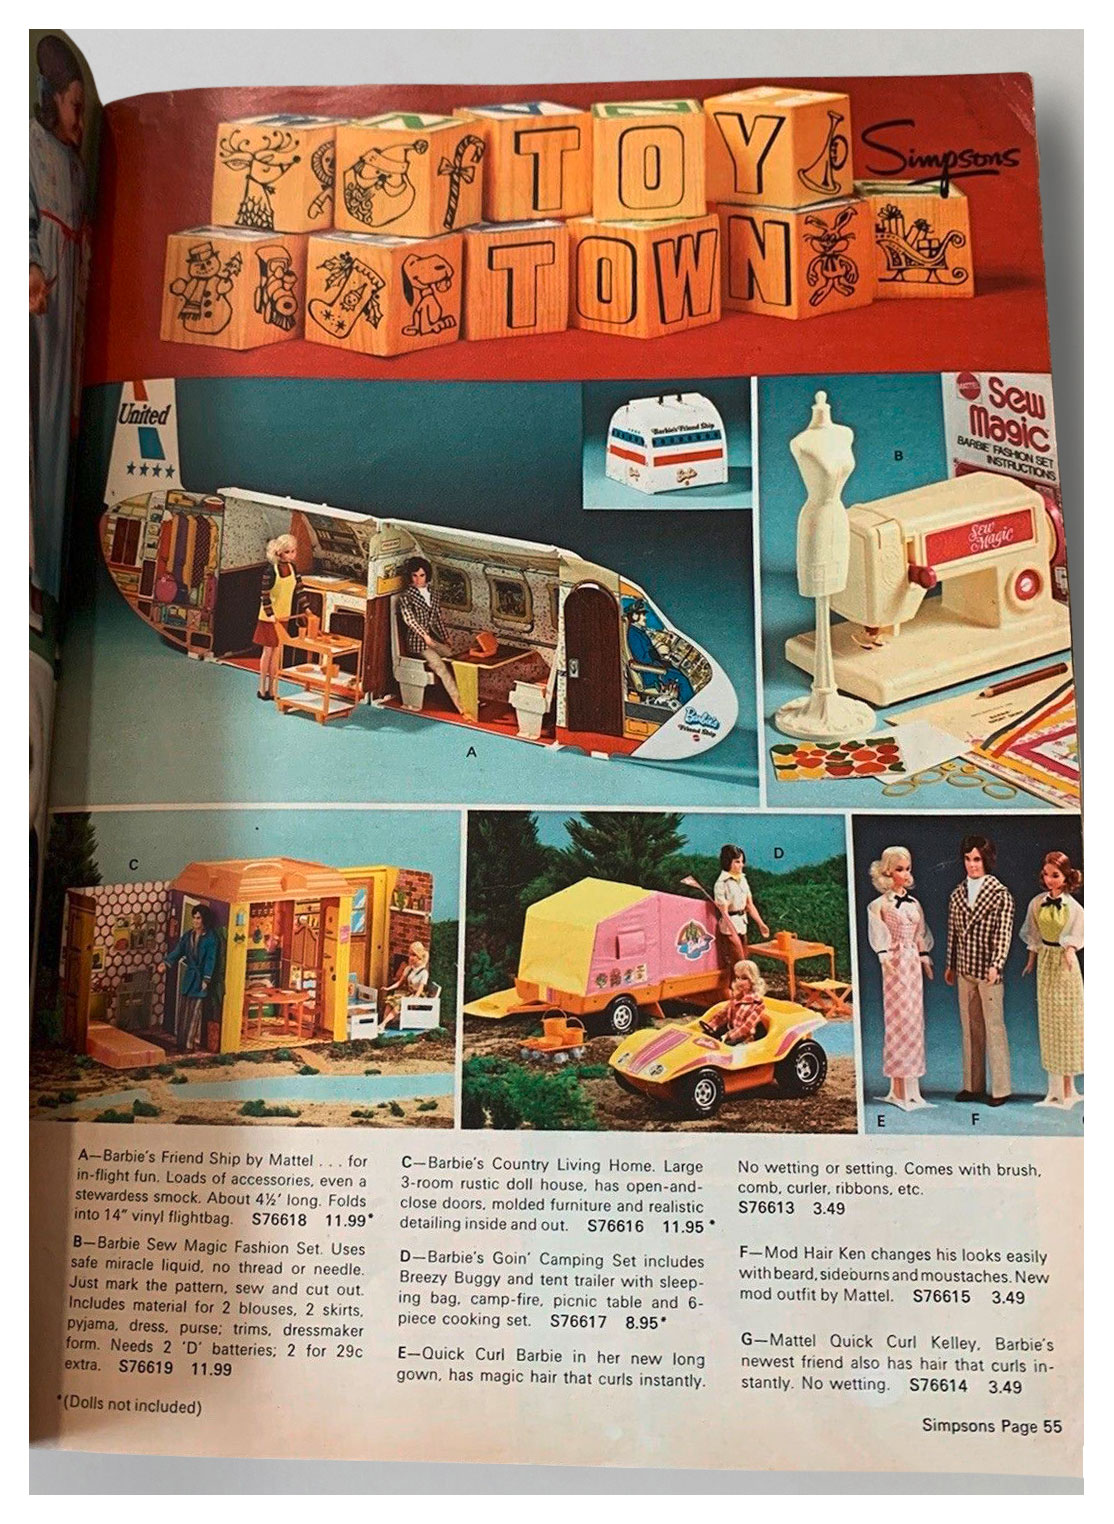 from 1973 Canadian Simpsons Christmas catalogue